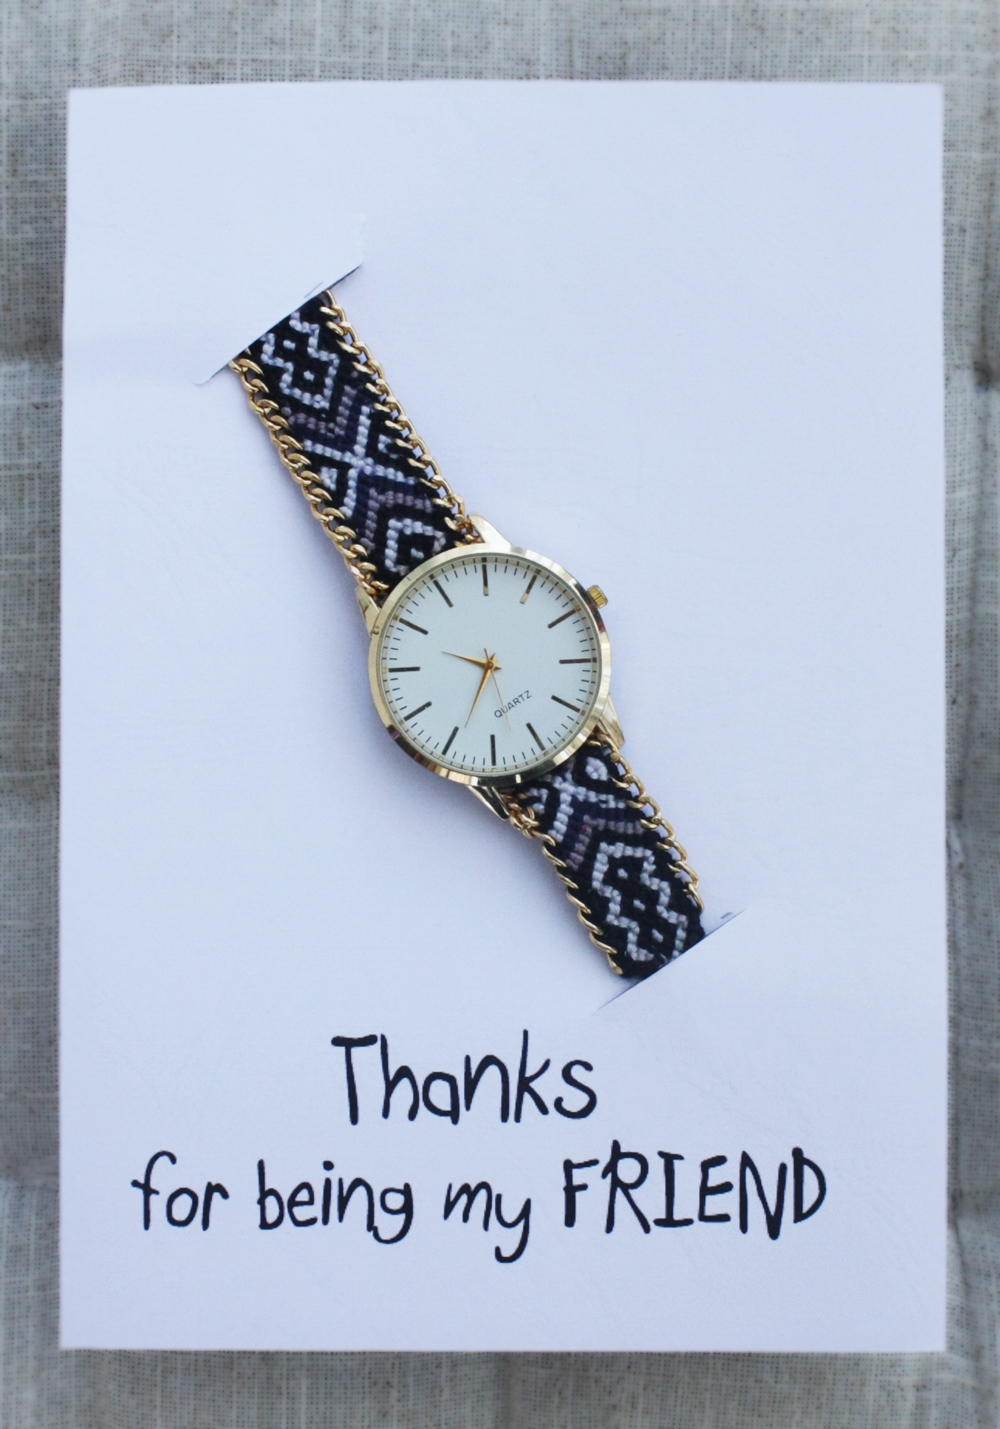 Colorful Band Friendship Wrist Gift Hanks For Being My Friend Card Watch